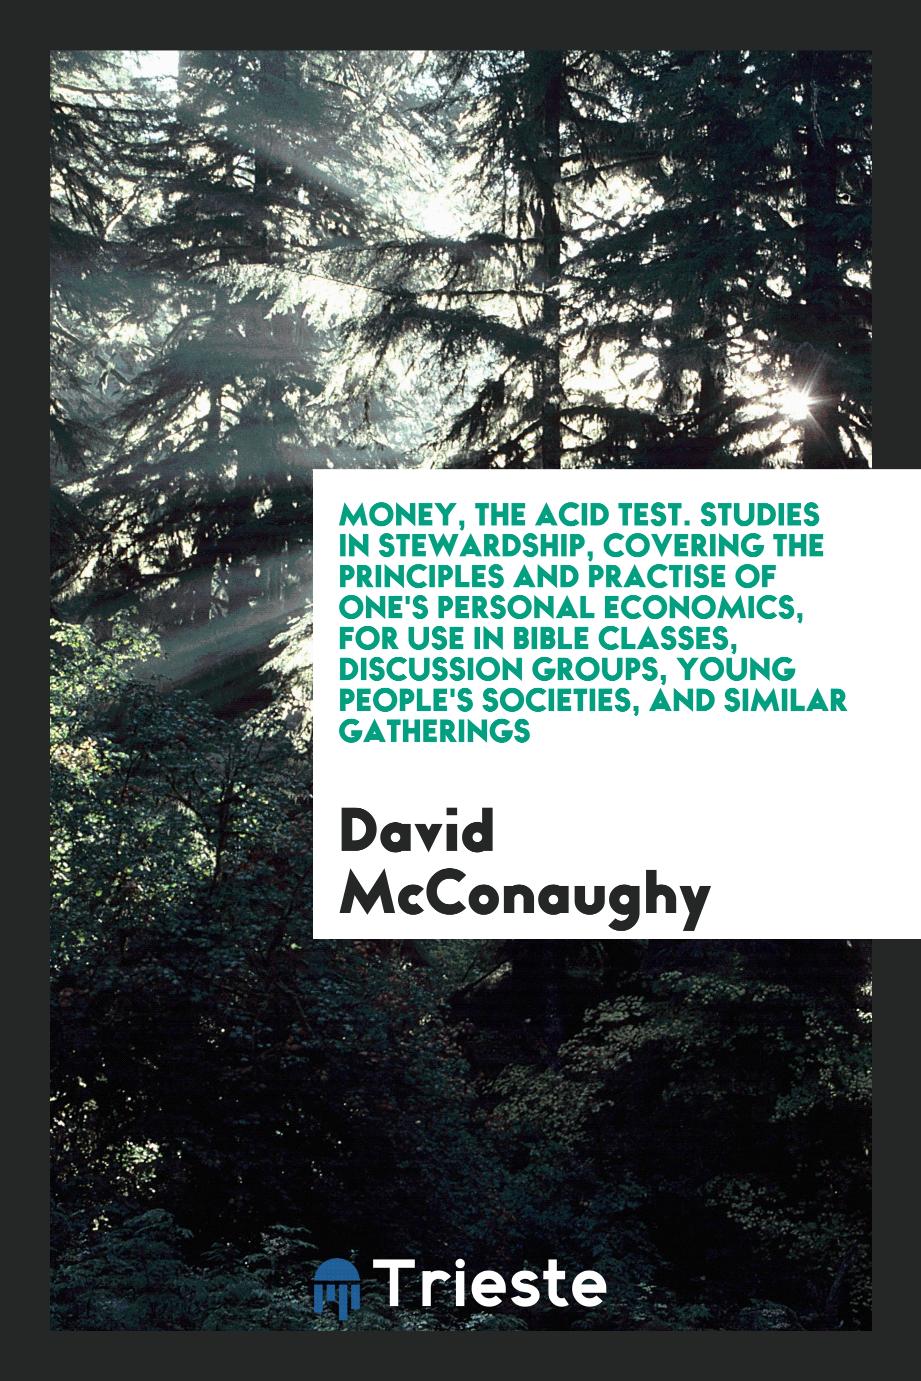 Money, the acid test. Studies in stewardship, covering the principles and practise of one's personal economics, for use in Bible classes, discussion groups, young people's societies, and similar gatherings